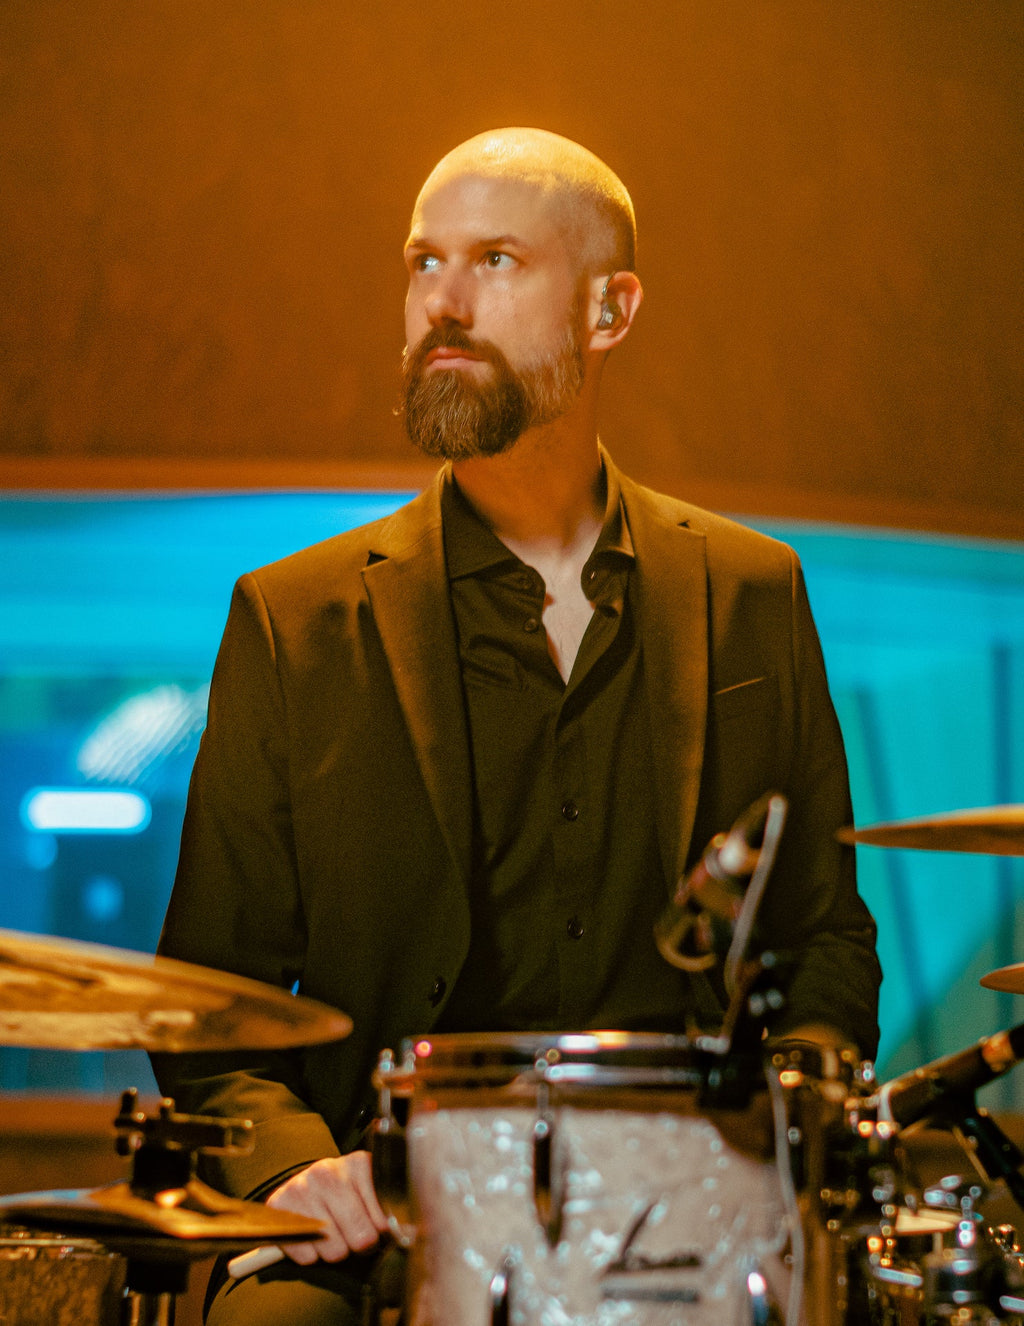 Benny Greb wearing a black suit and black shirt sitting in front of drums